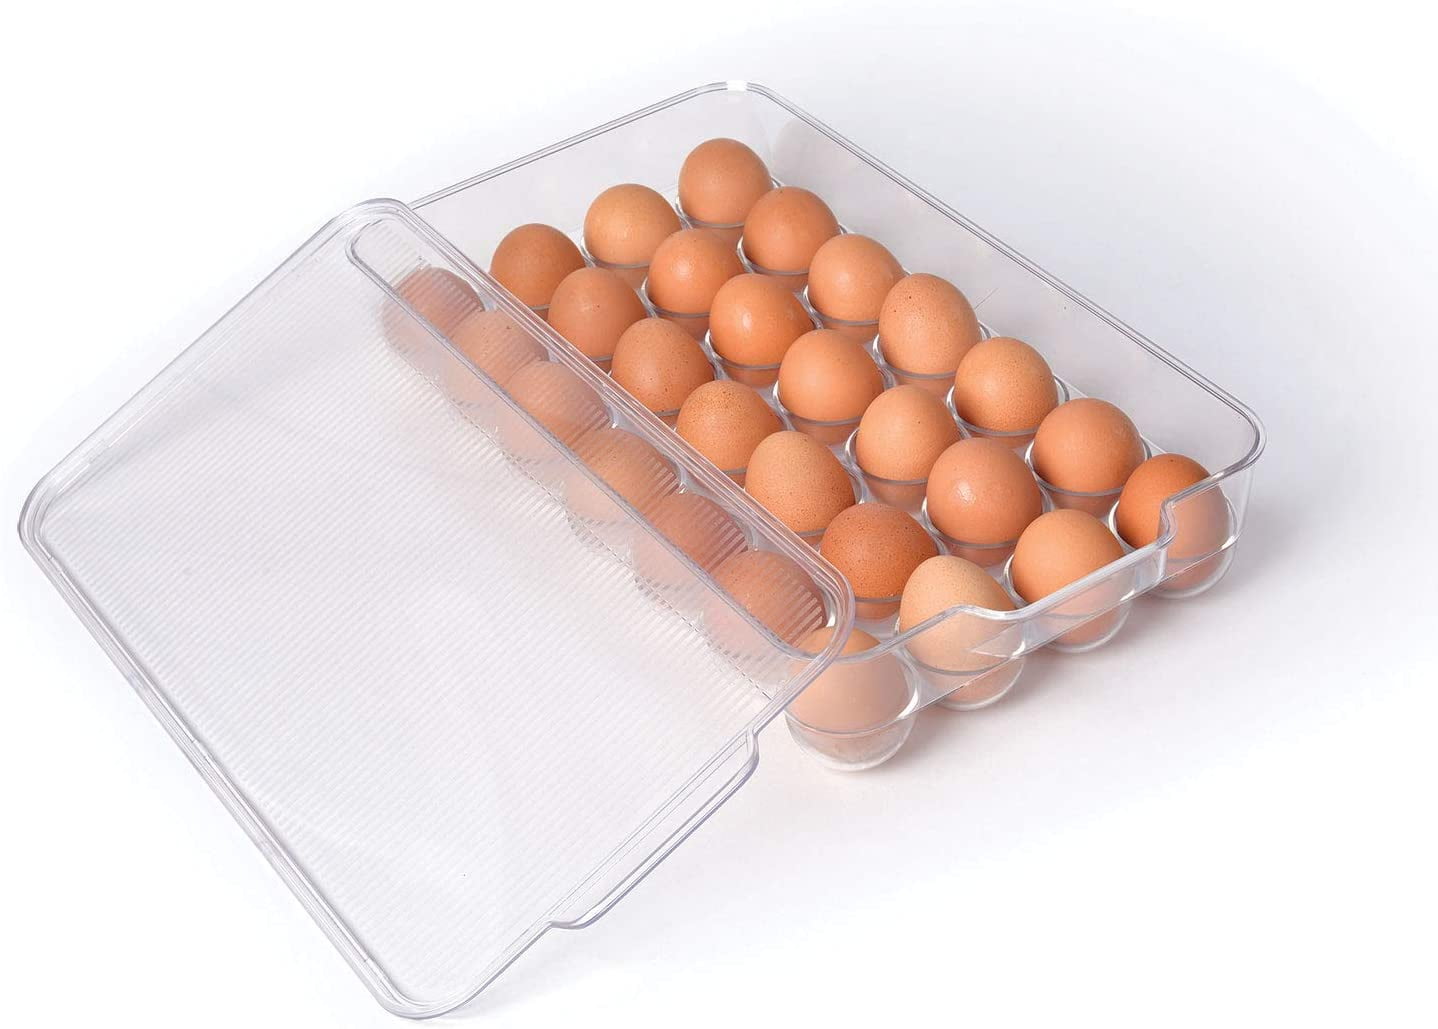 2PCS Egg Trays for Refrigerator,2 x 24 Plastic Egg Holder Carriers with Egg for 